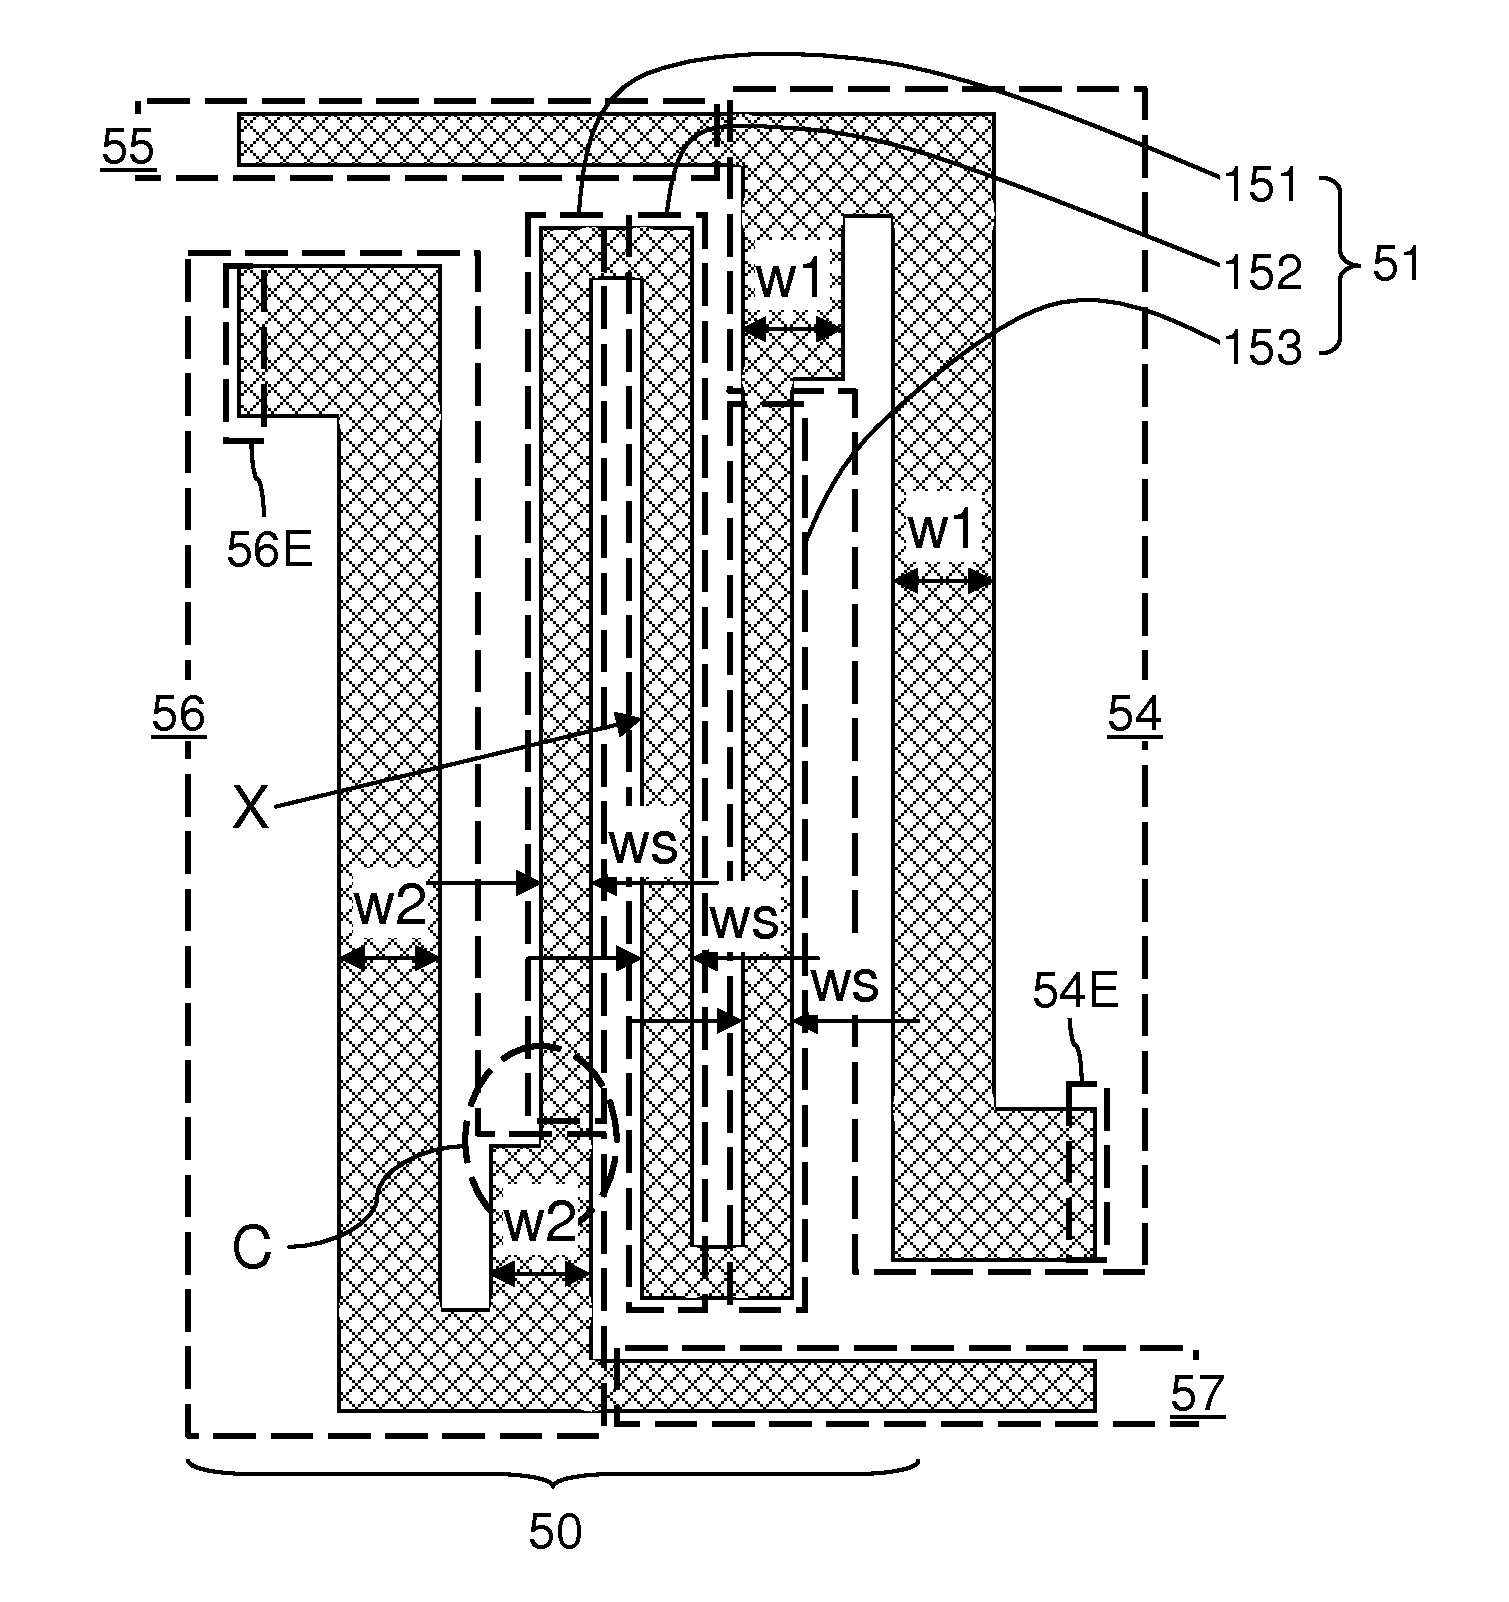 Electrically programmable metal fuse